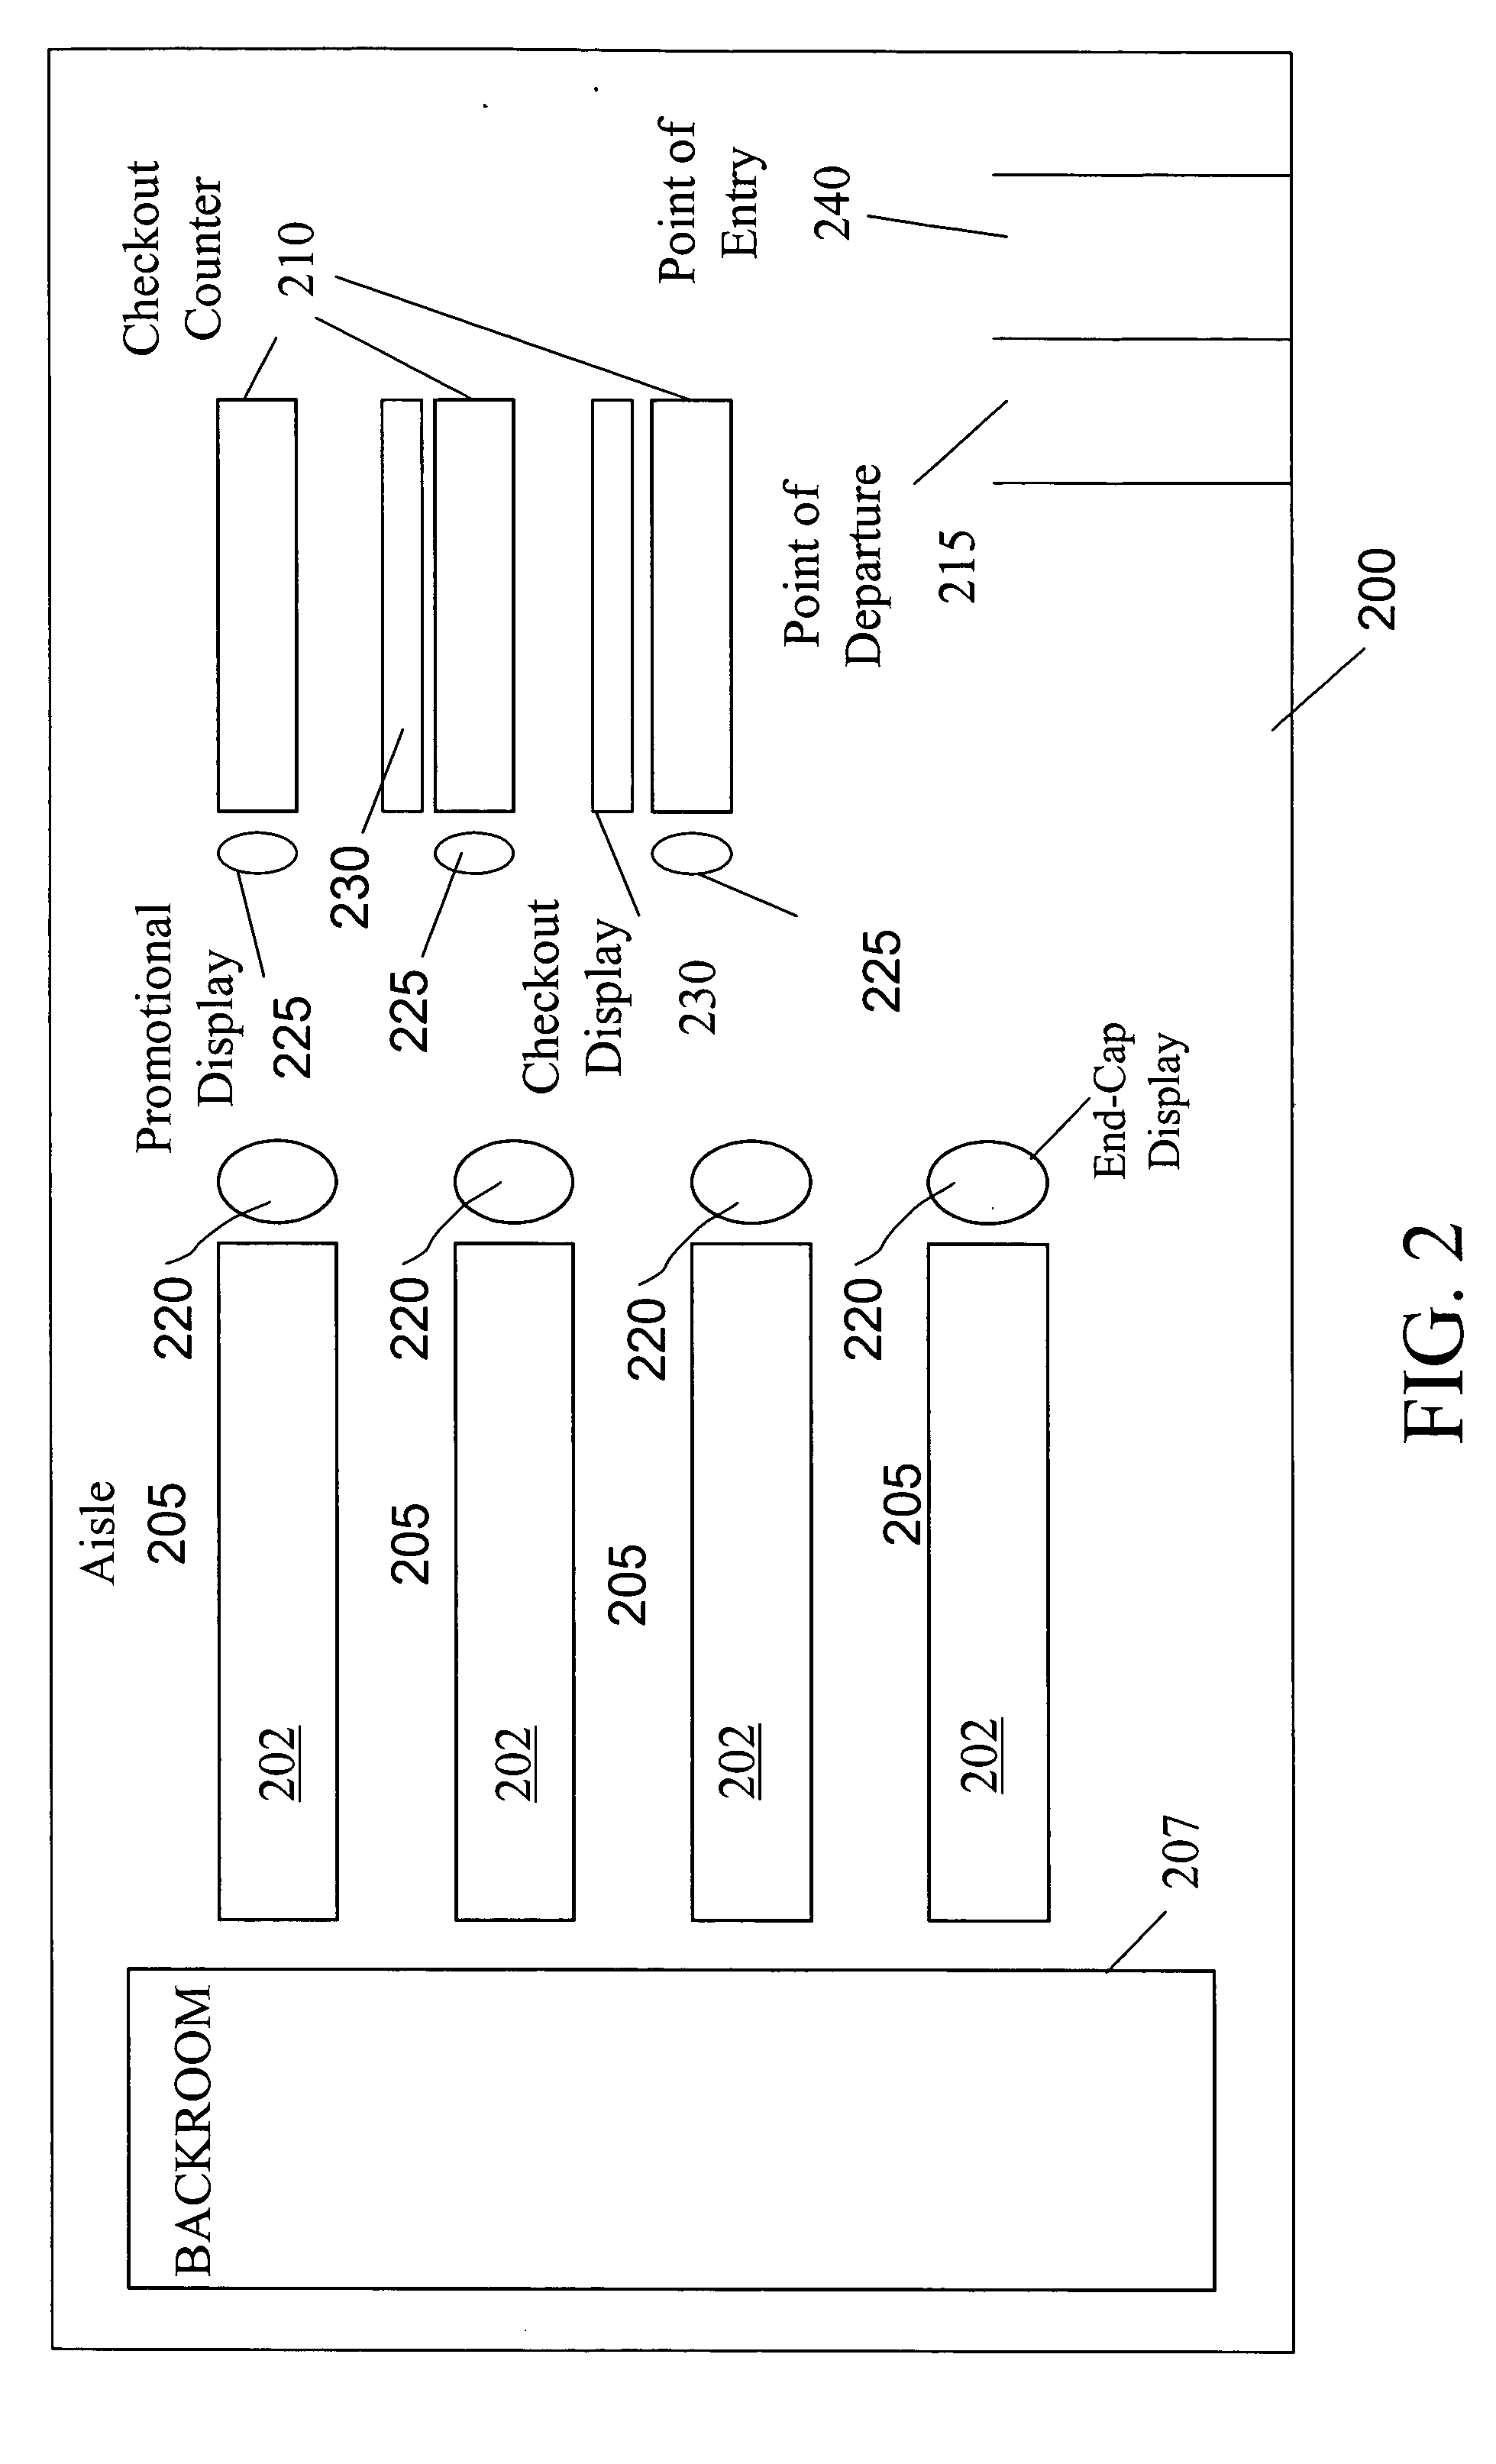 System and method employing radio frequency identification in merchandising management